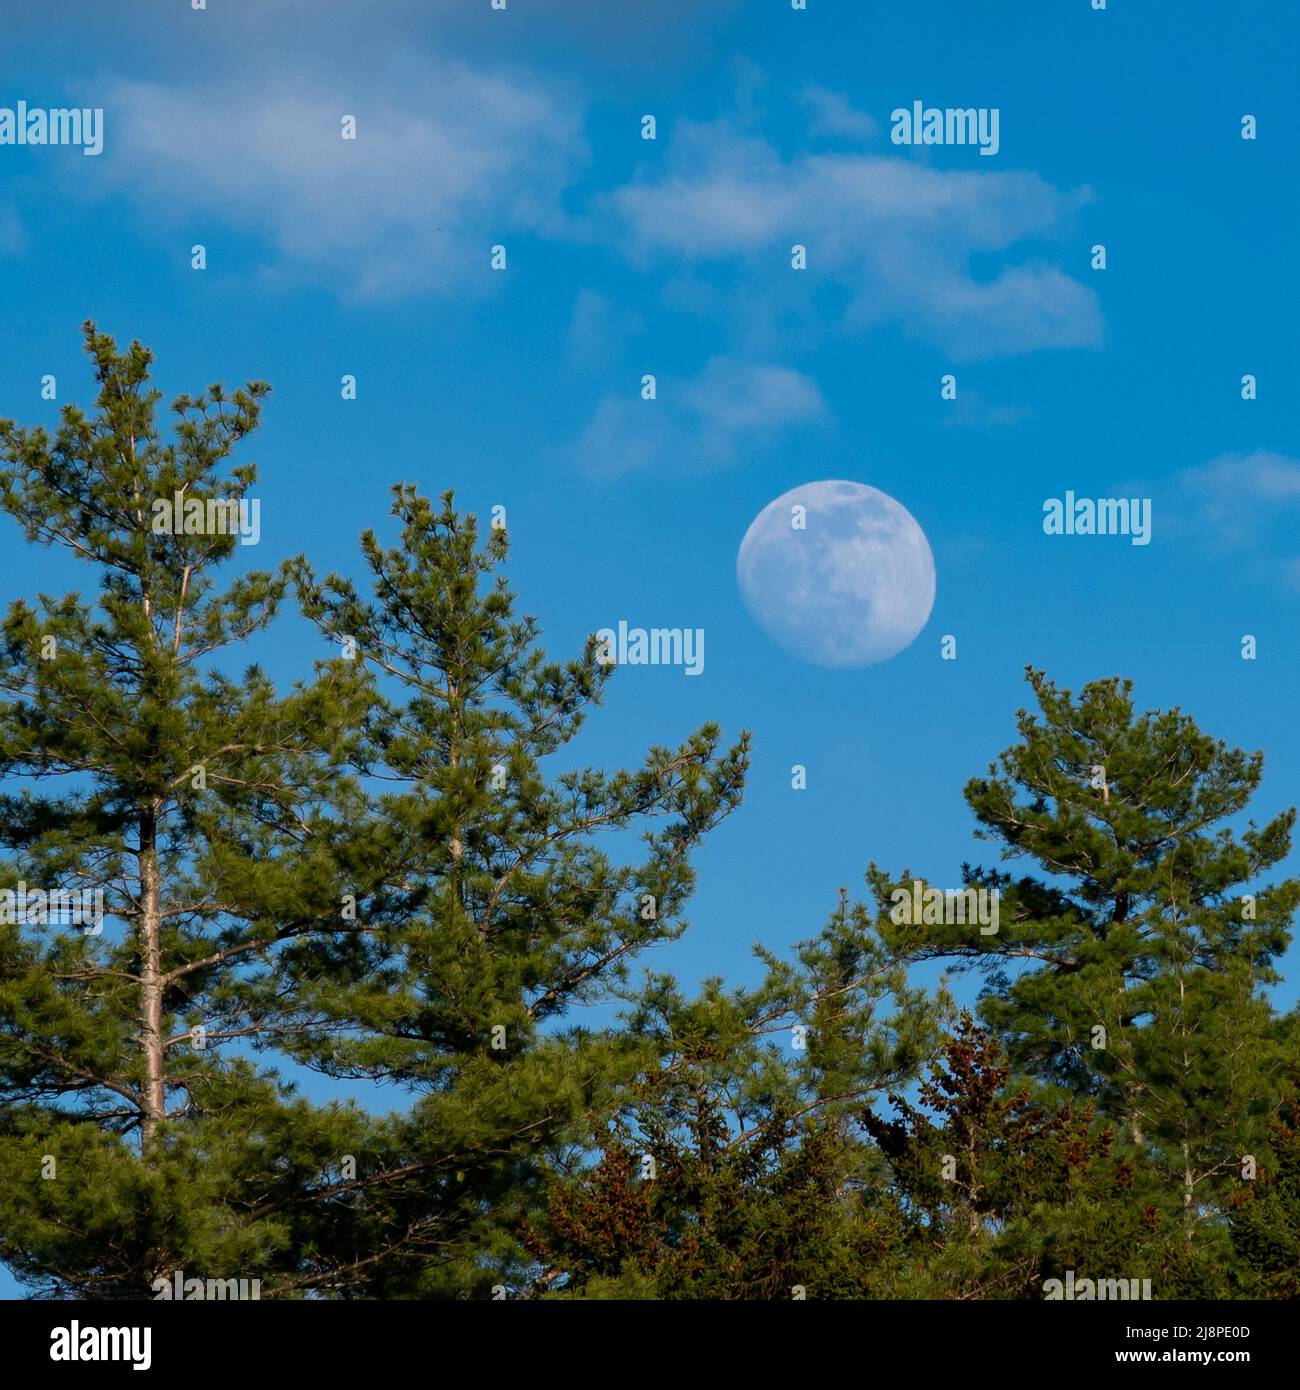 Nearly full moon rising above the pine trees early in the evening in the Adirondack Mountains, NY with a deep blue sky and faint white clouds Stock Photo